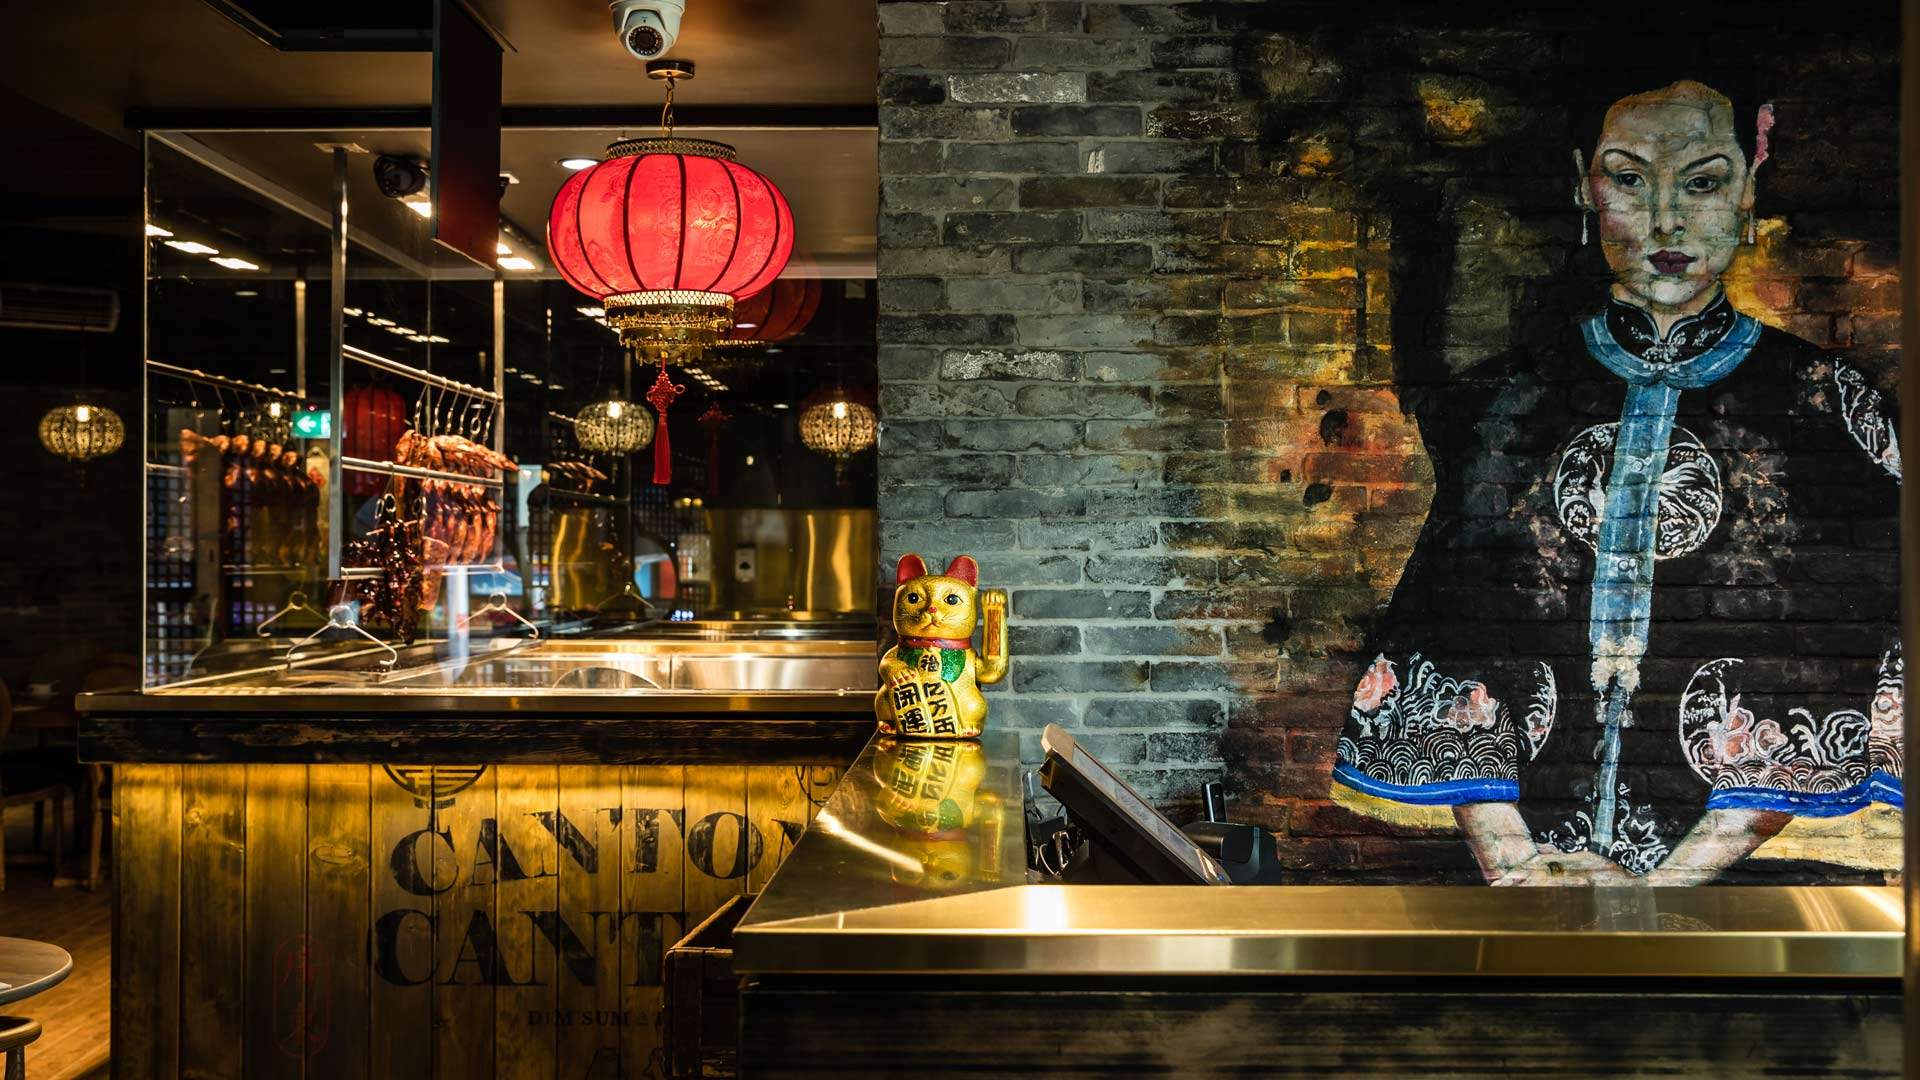 Canton! Canton! Is the CBD's New Home of Yum Cha and Hong Kong-Style Roast Meats